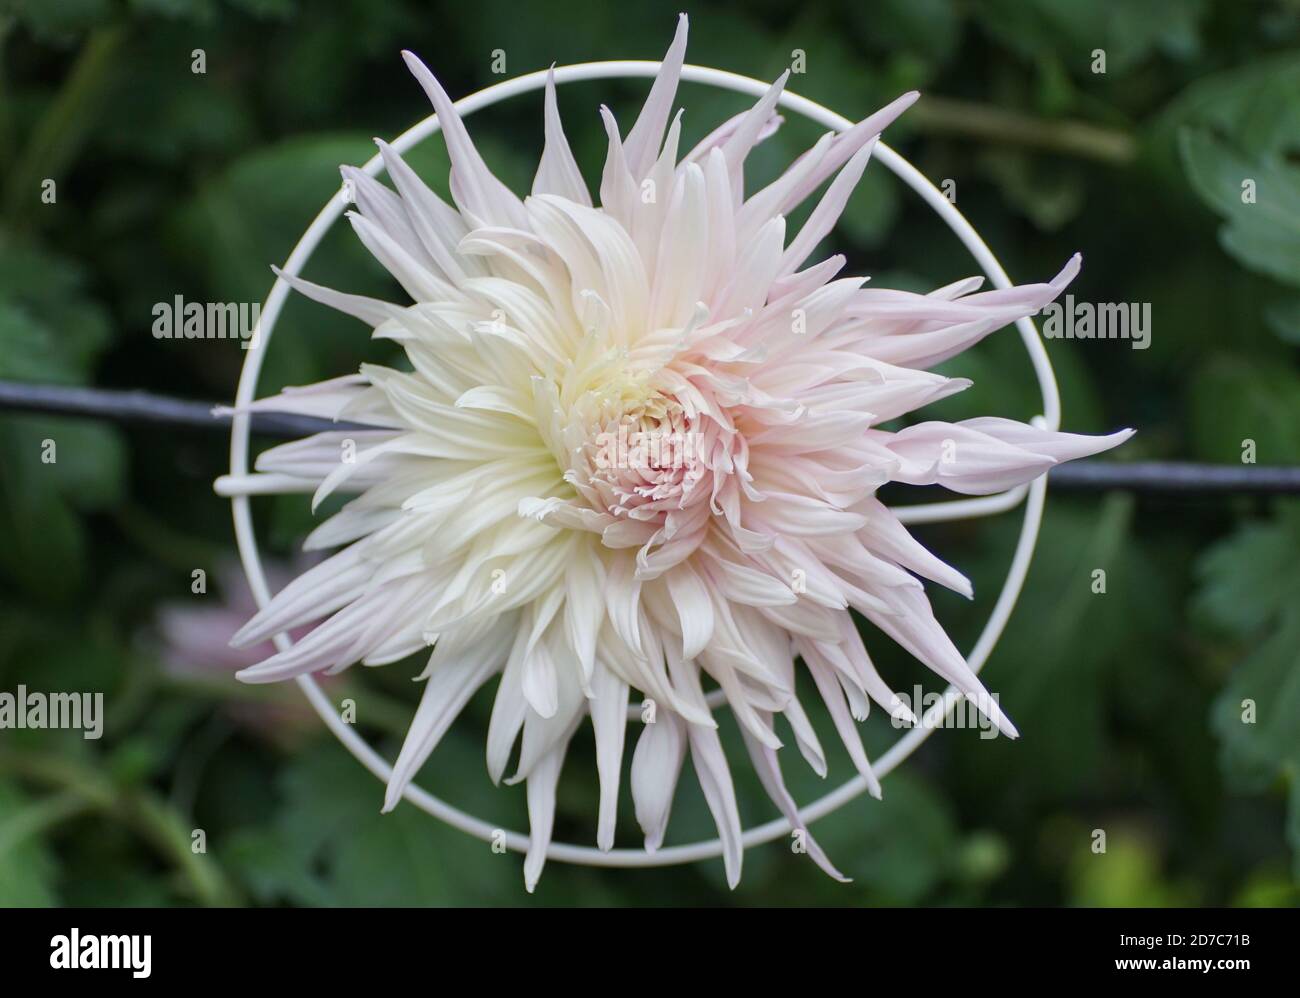 A white spider mum flower inside a metal ring Stock Photo